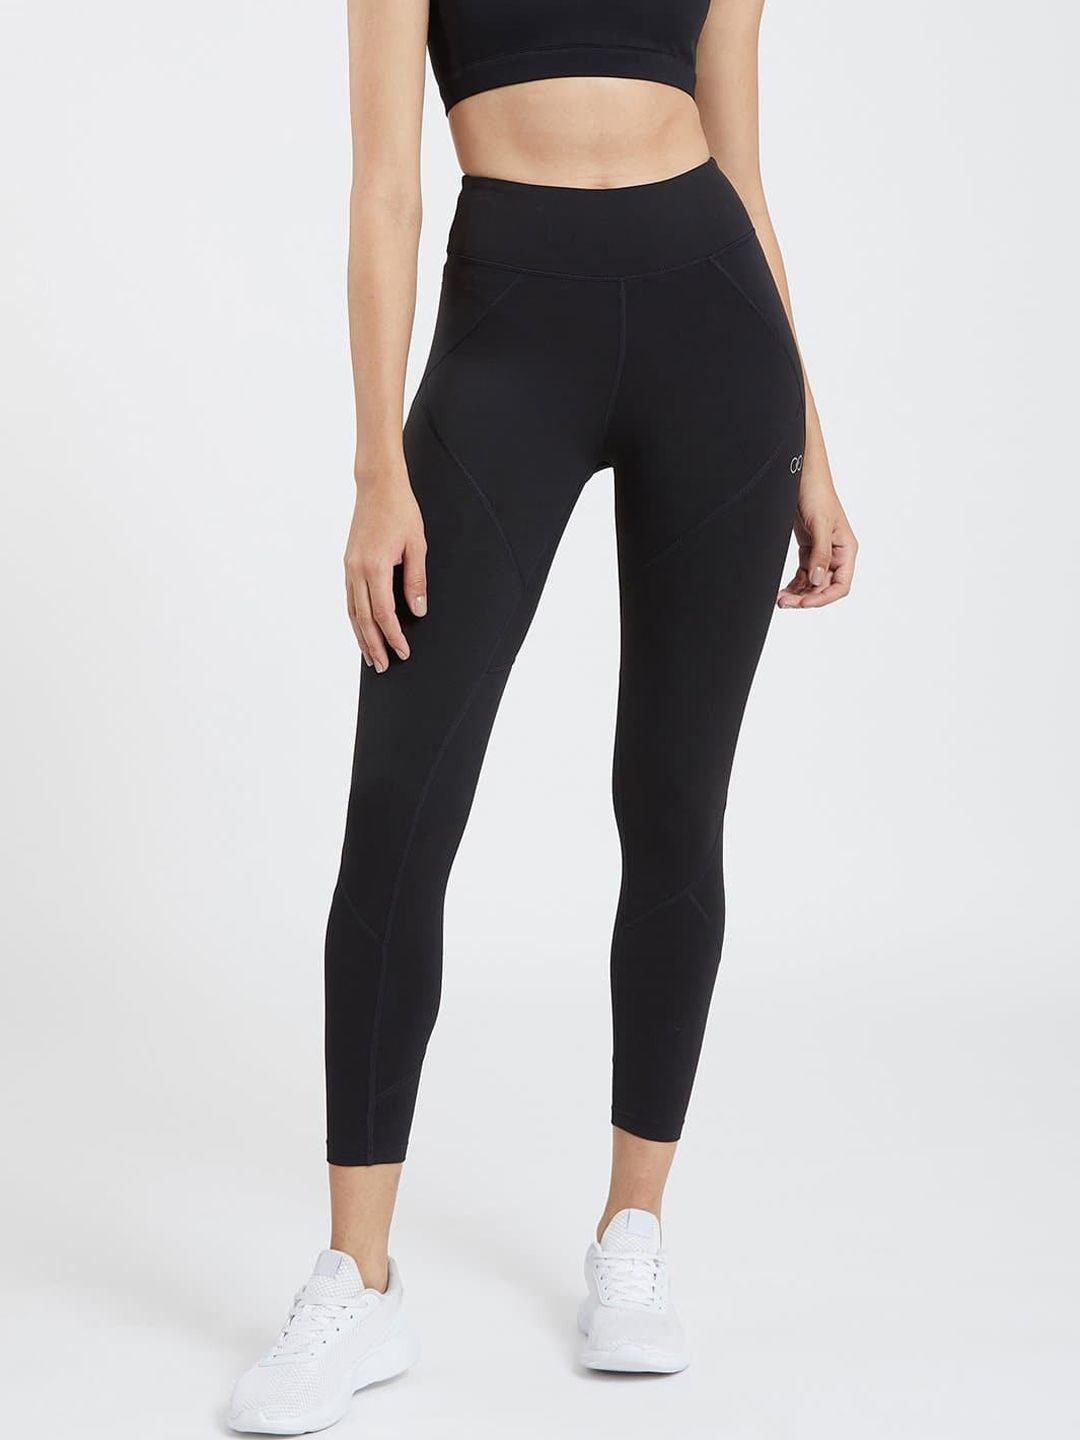 CREEZ Women Black Solid Rapid-Dry Training Tights Price in India